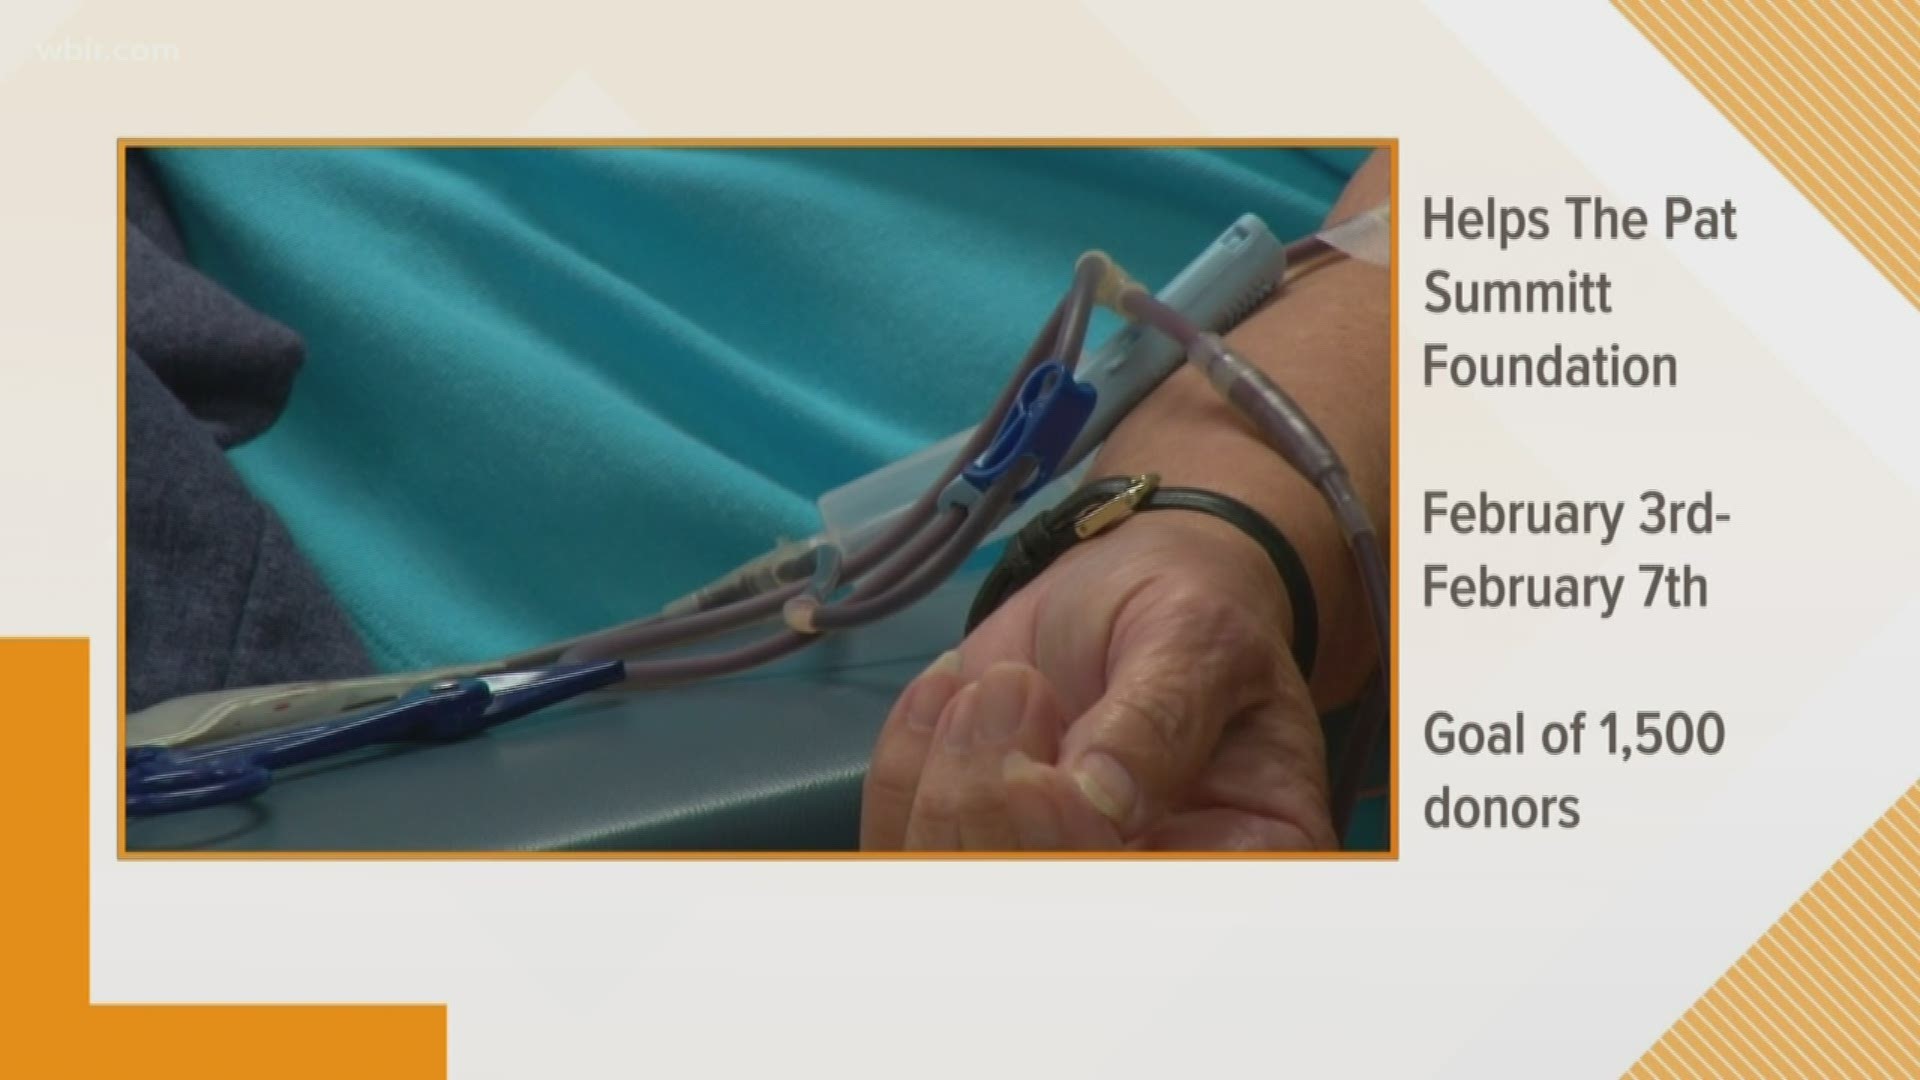 MEDIC will make a $10 donation to The Pat Summitt Foundation for every donor who donates blood.